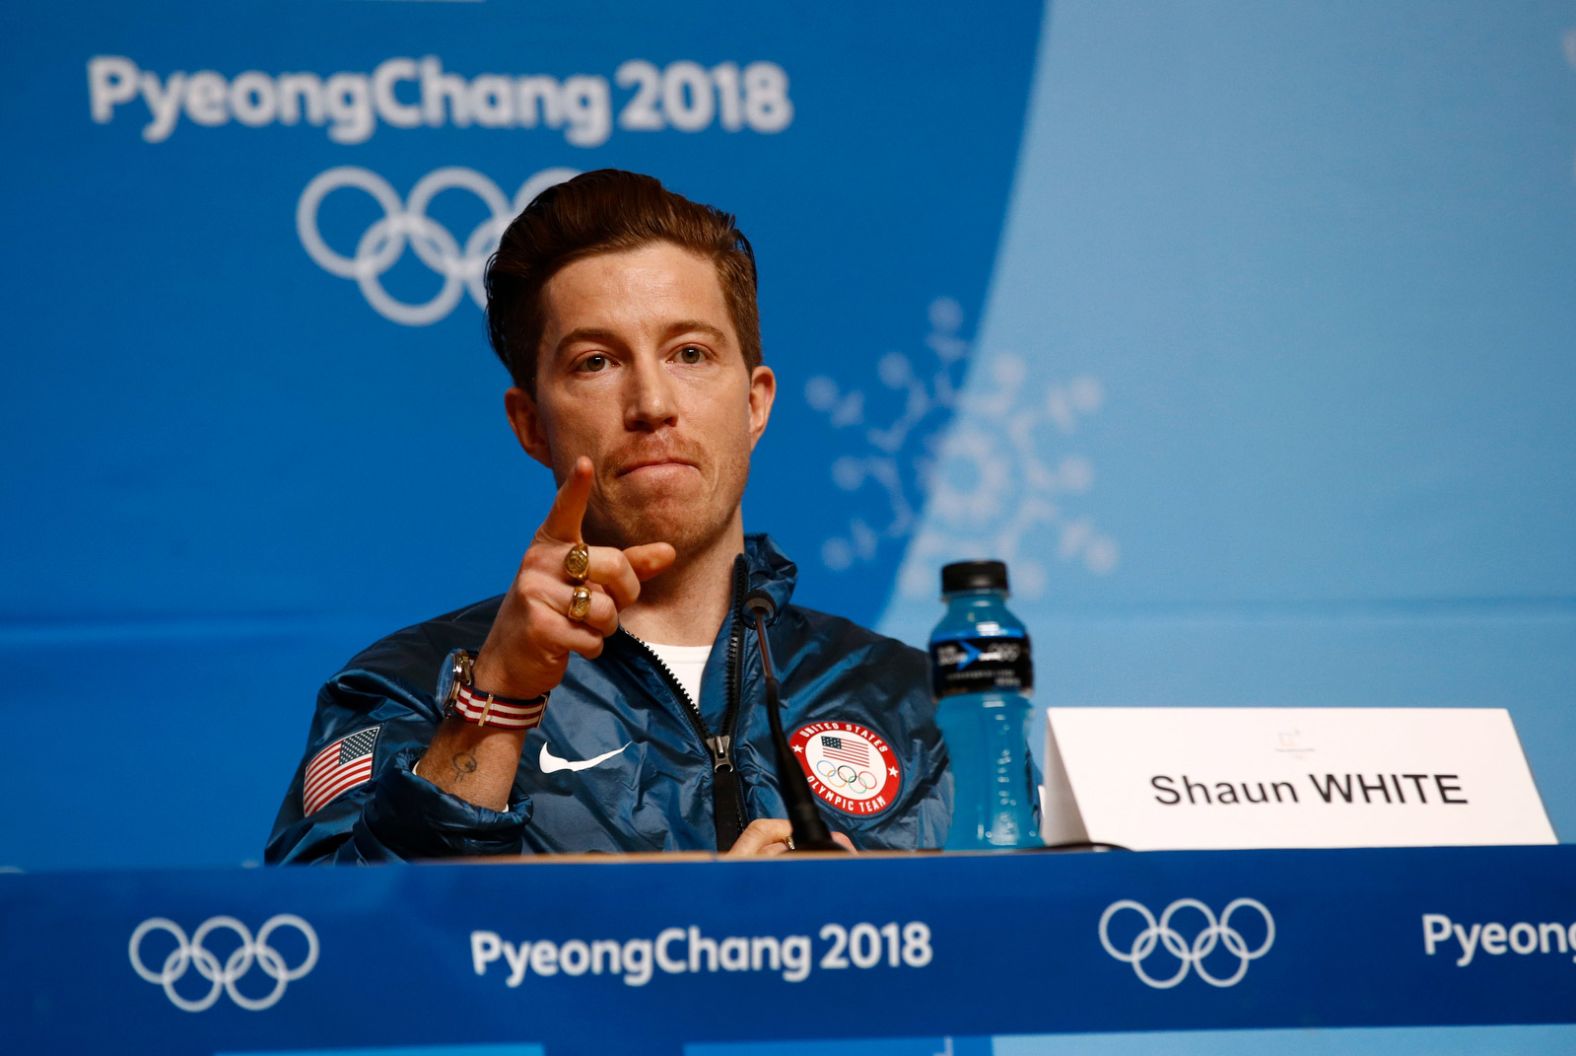 During a news conference after his 2018 Olympic win, <a href="index.php?page=&url=https%3A%2F%2Fwww.cnn.com%2F2018%2F02%2F14%2Fsport%2Fshaun-white-allegations-intl%2Findex.html" target="_blank">White called past sexual-harassment allegations levied against him "gossip."</a> White had previously admitted to sending lewd text messages to Lena Zawaideh, the former drummer of his band, in 2016, and the parties later reached an undisclosed settlement.